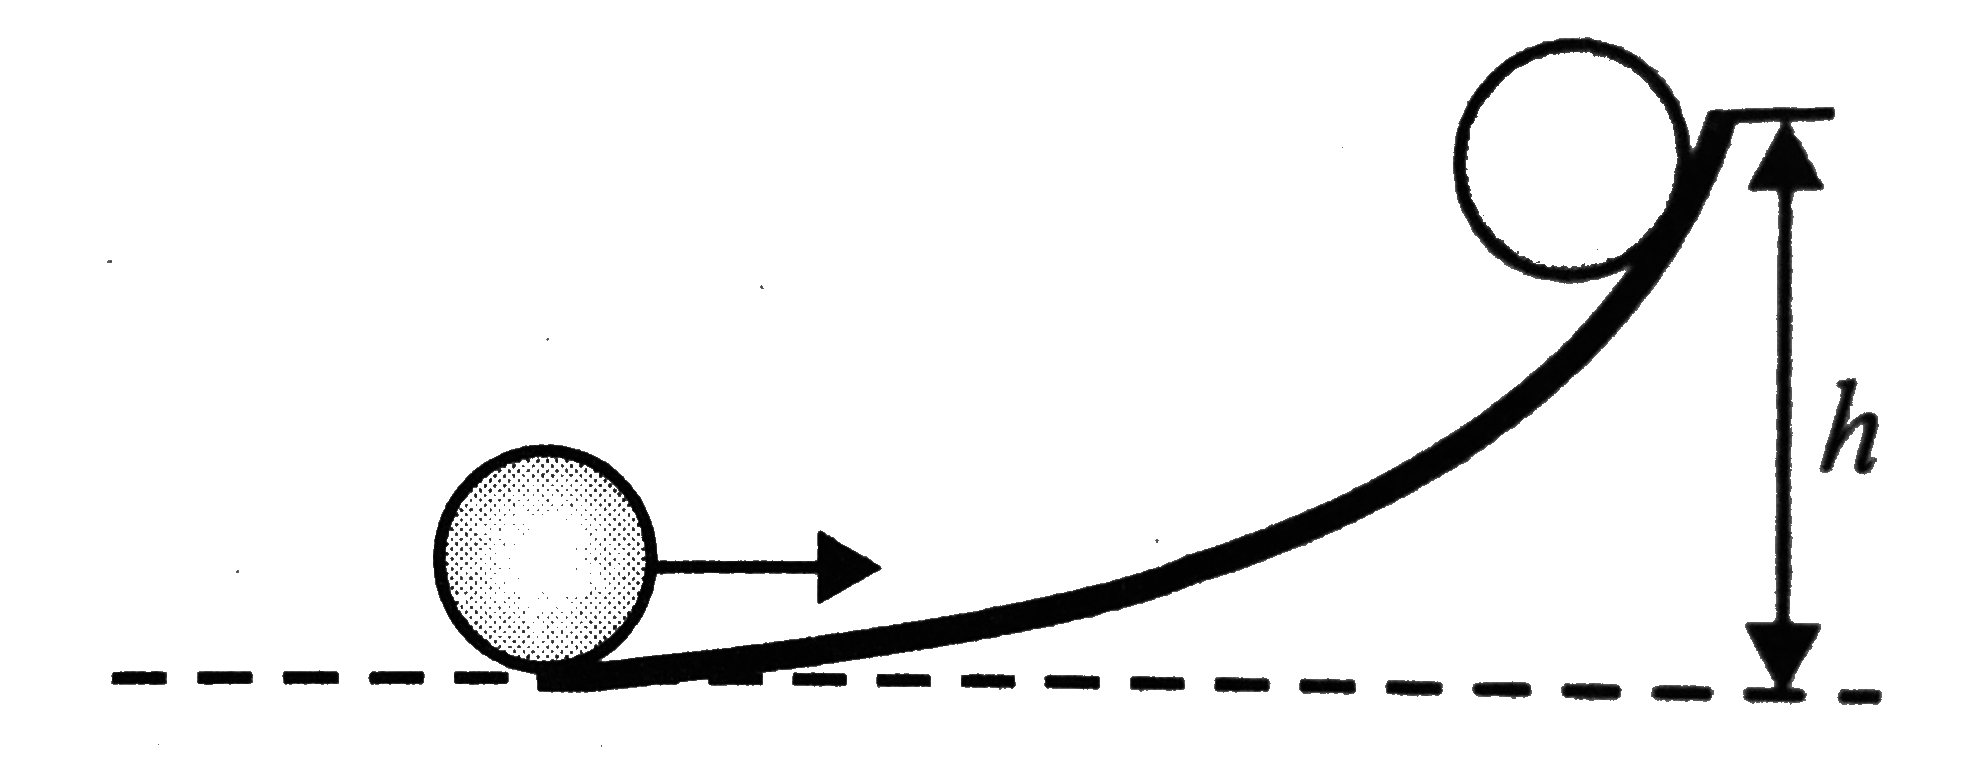 In the figure shown, a ball without sliding on a horizontal, surface. It ascends a curved track up to height h returns. The value of h is h(1) for sufficiently rough curved track to avoid sliding and is h(2) for smooth curved track then